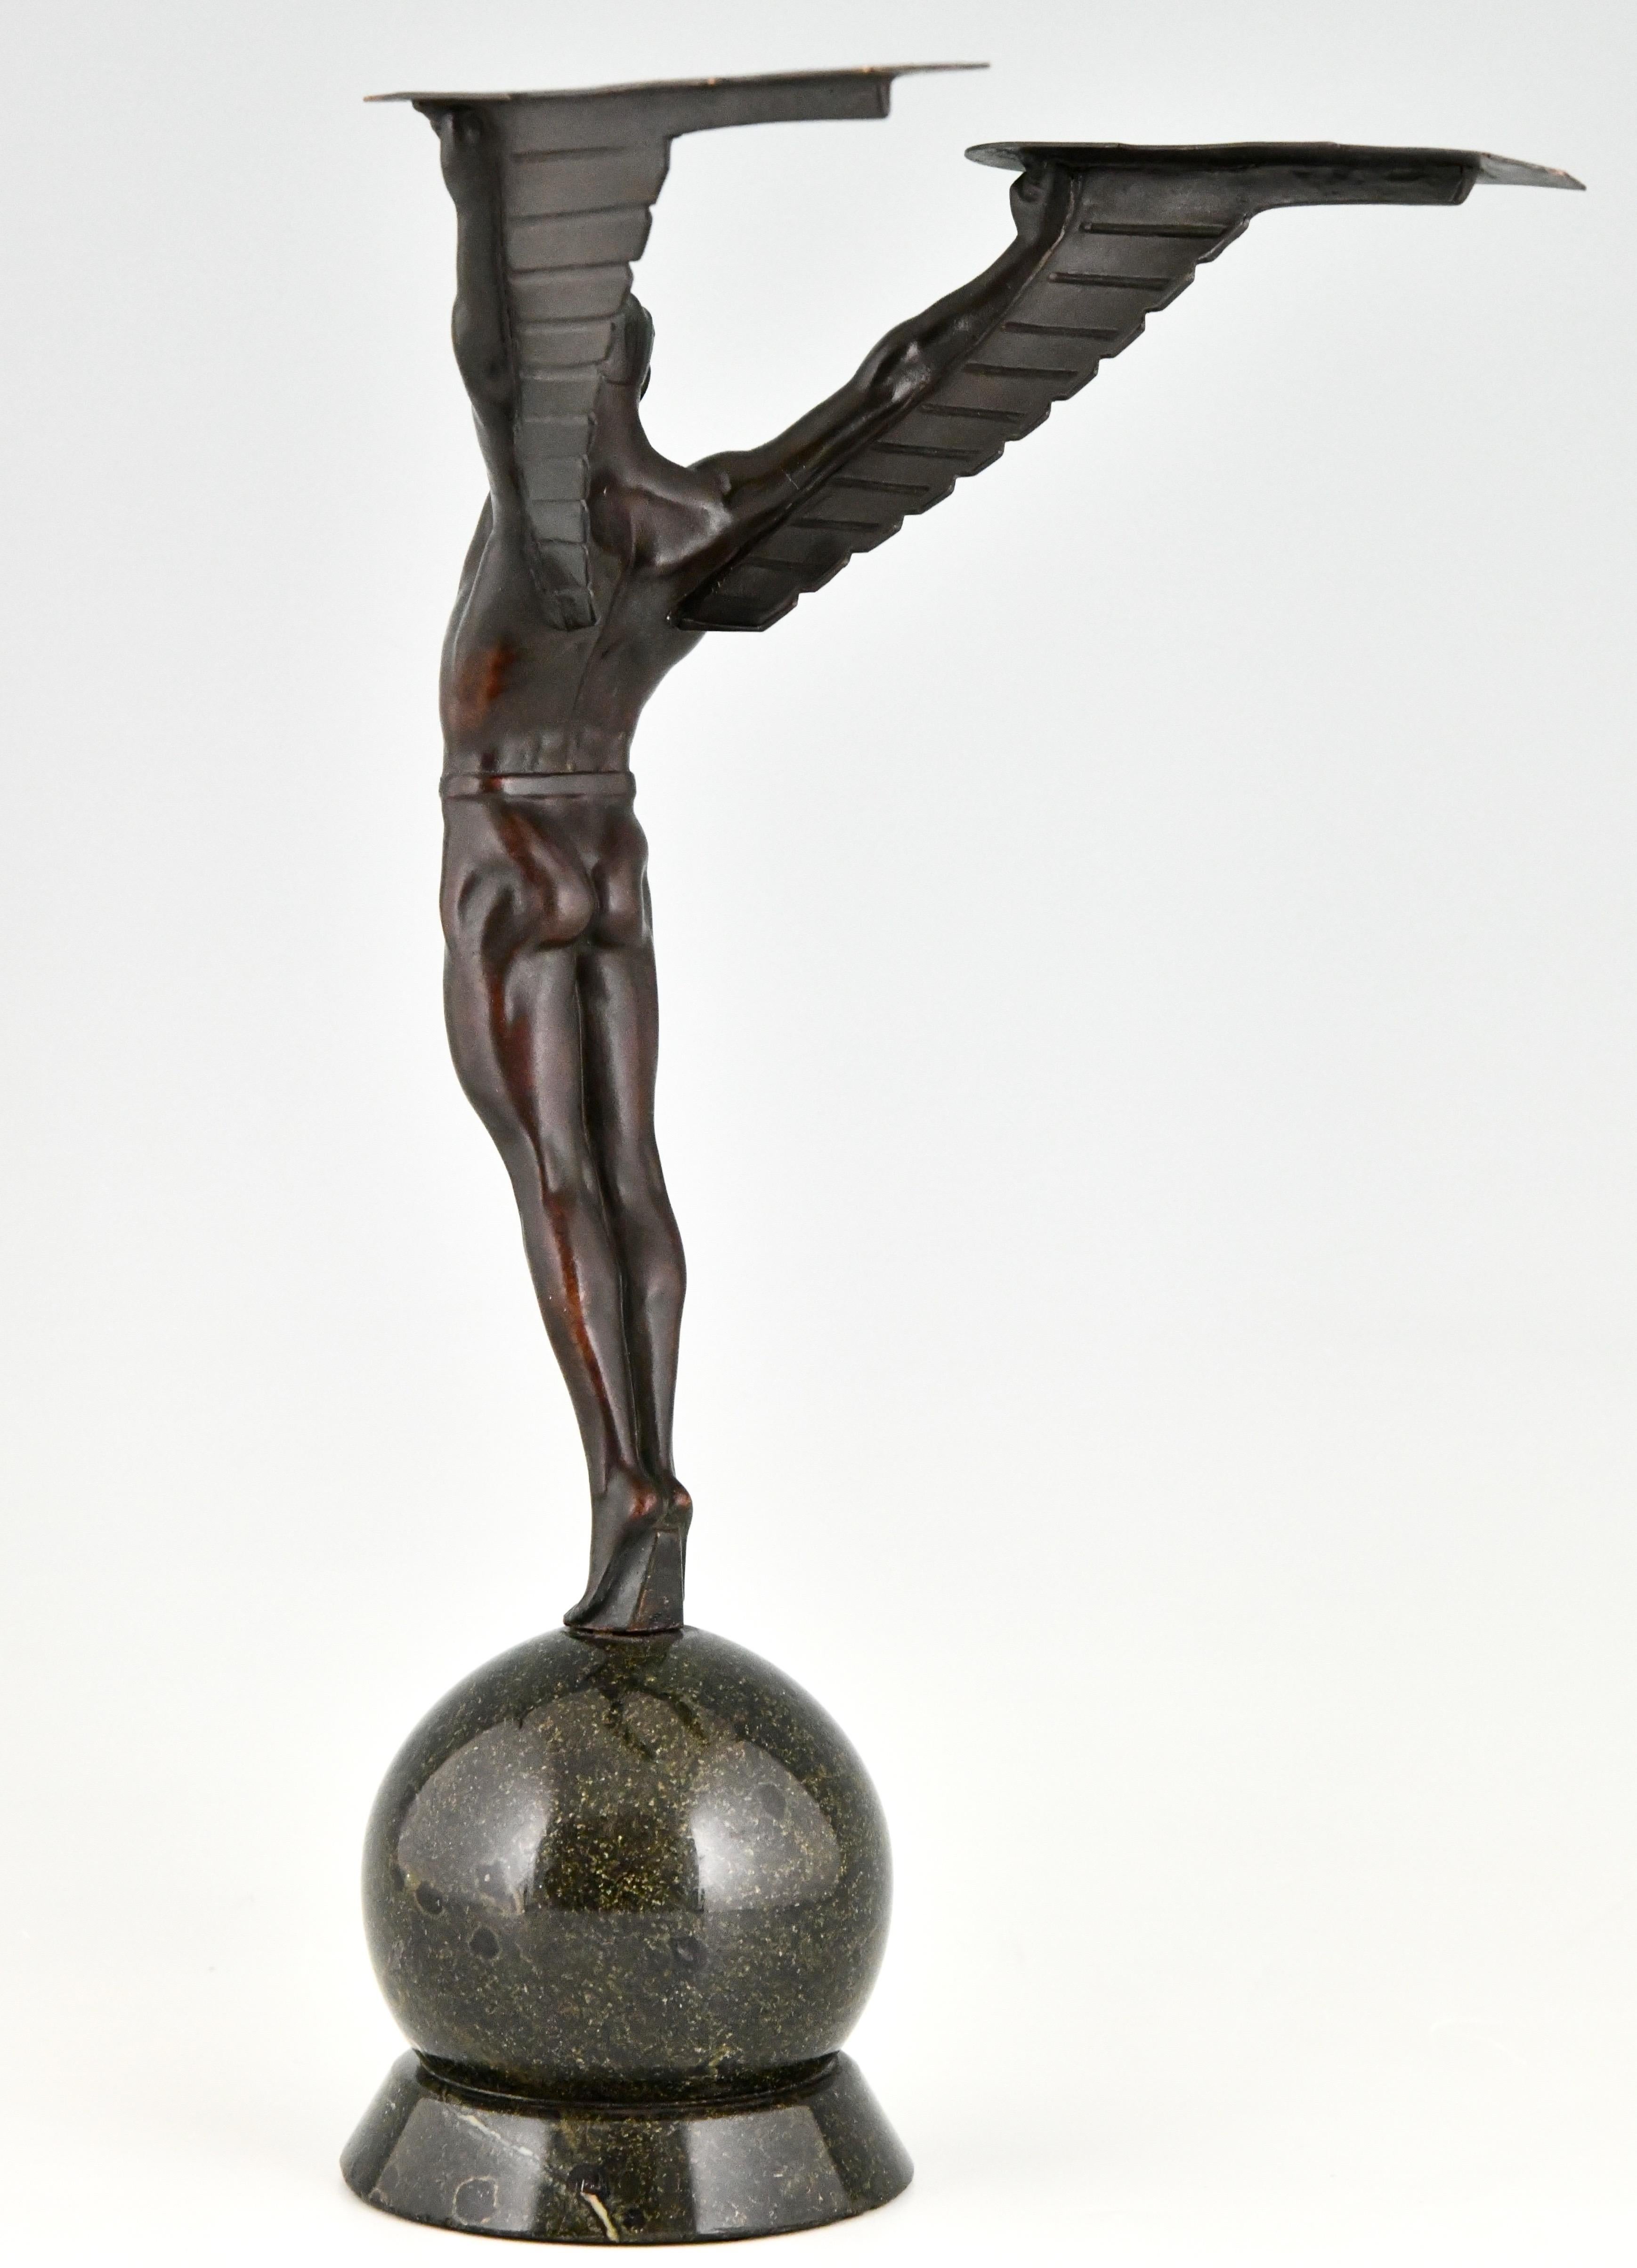 German Icarus Art Deco Sculpture of a Winged Athlete in the Style of Schmidt Hofer